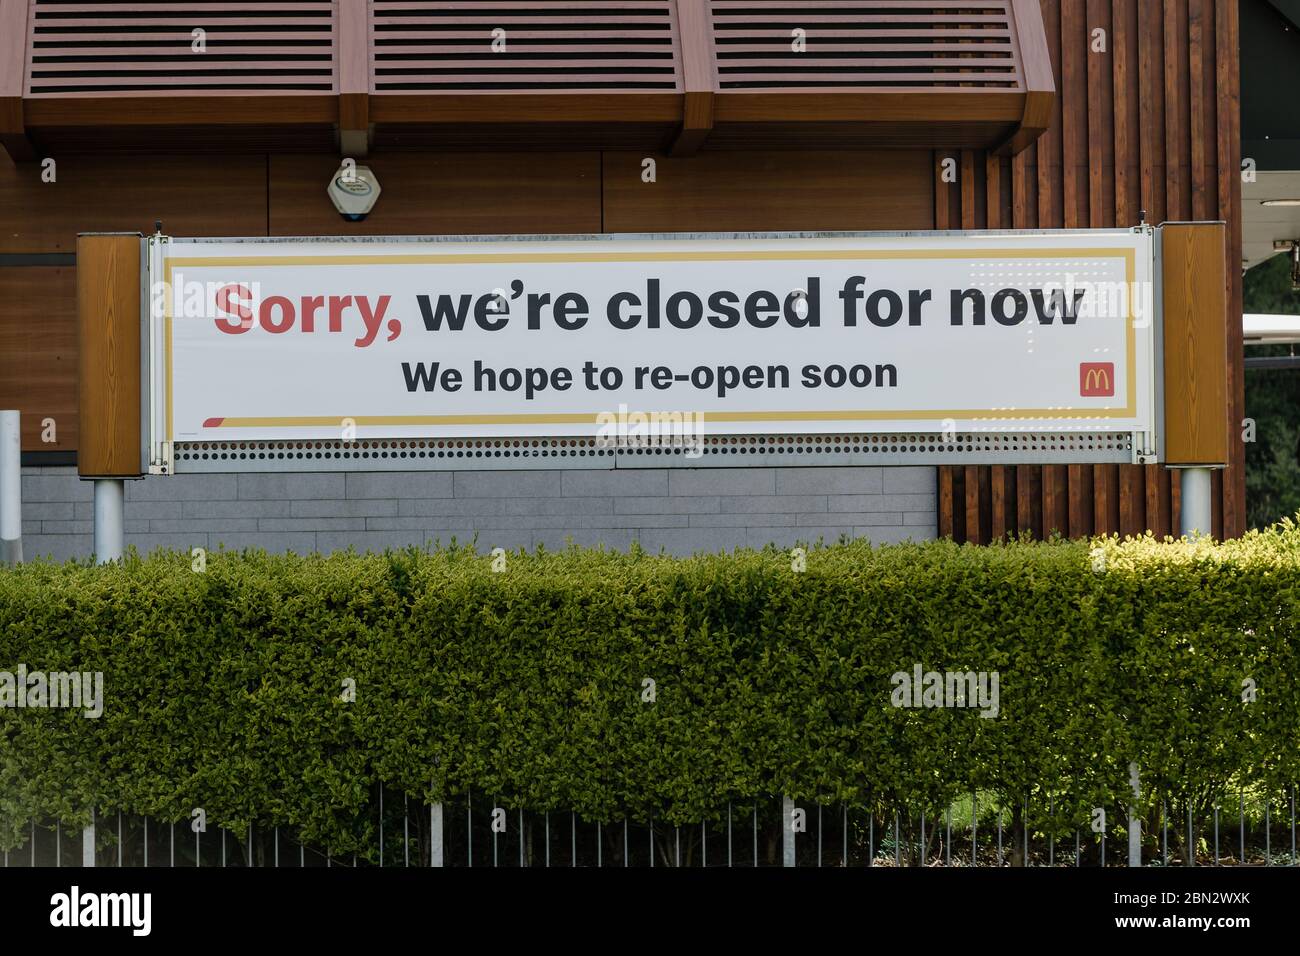 MERTHYR TYDFIL, WALES - 11 MAY 2020 - A Mcdonalds sign telling customer that they are sorry they are closed and will open again soon. Stock Photo